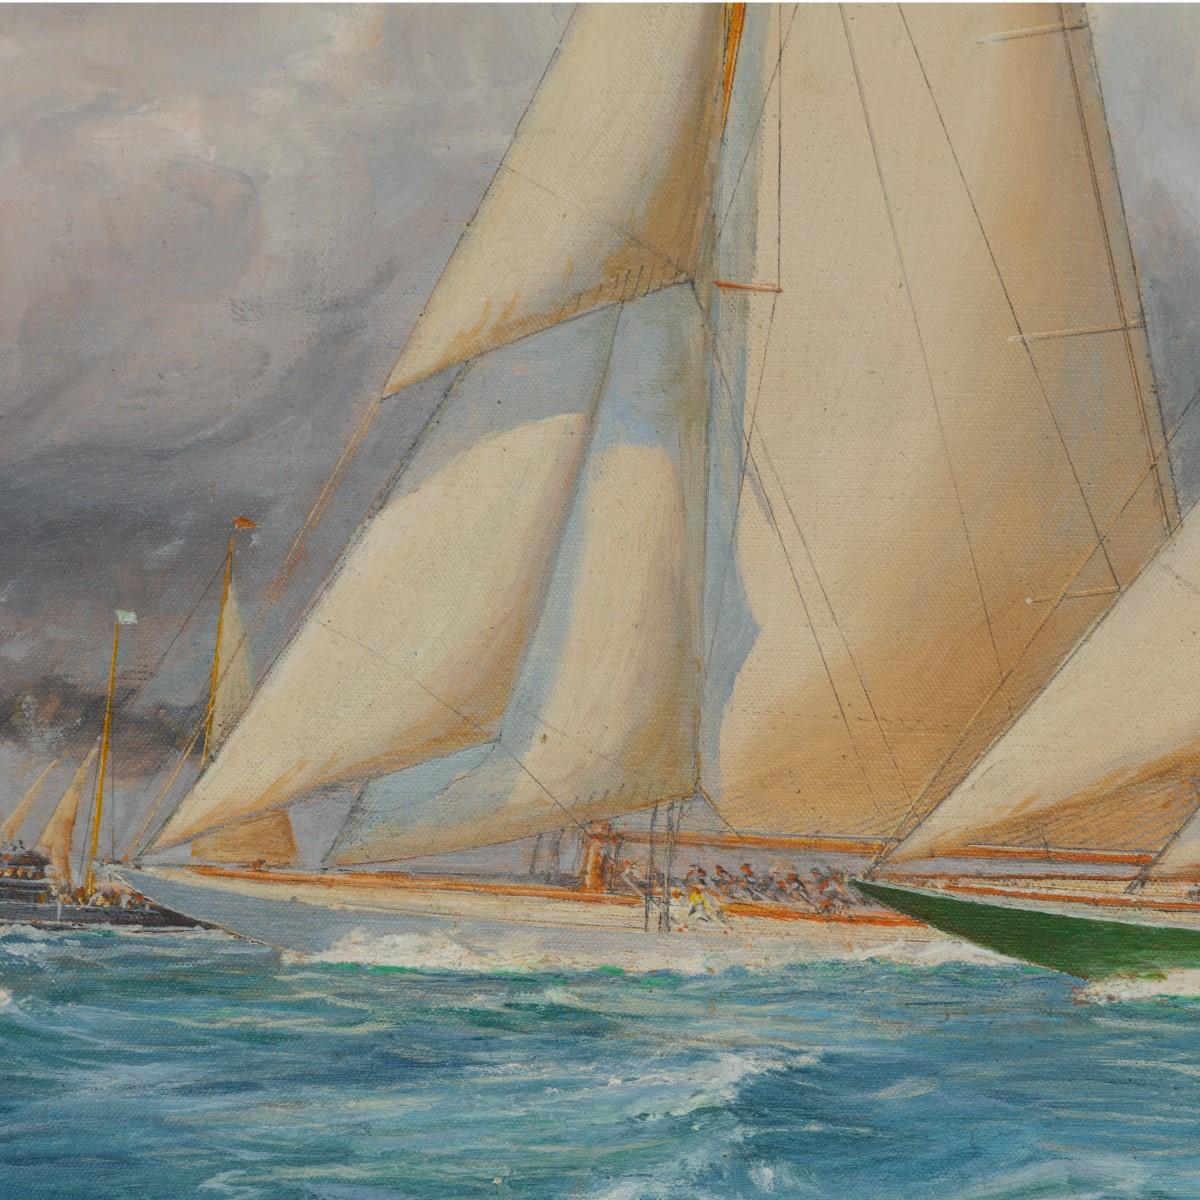 1930 America’s Cup racing off Newport, signed ‘Harold Wyllie’